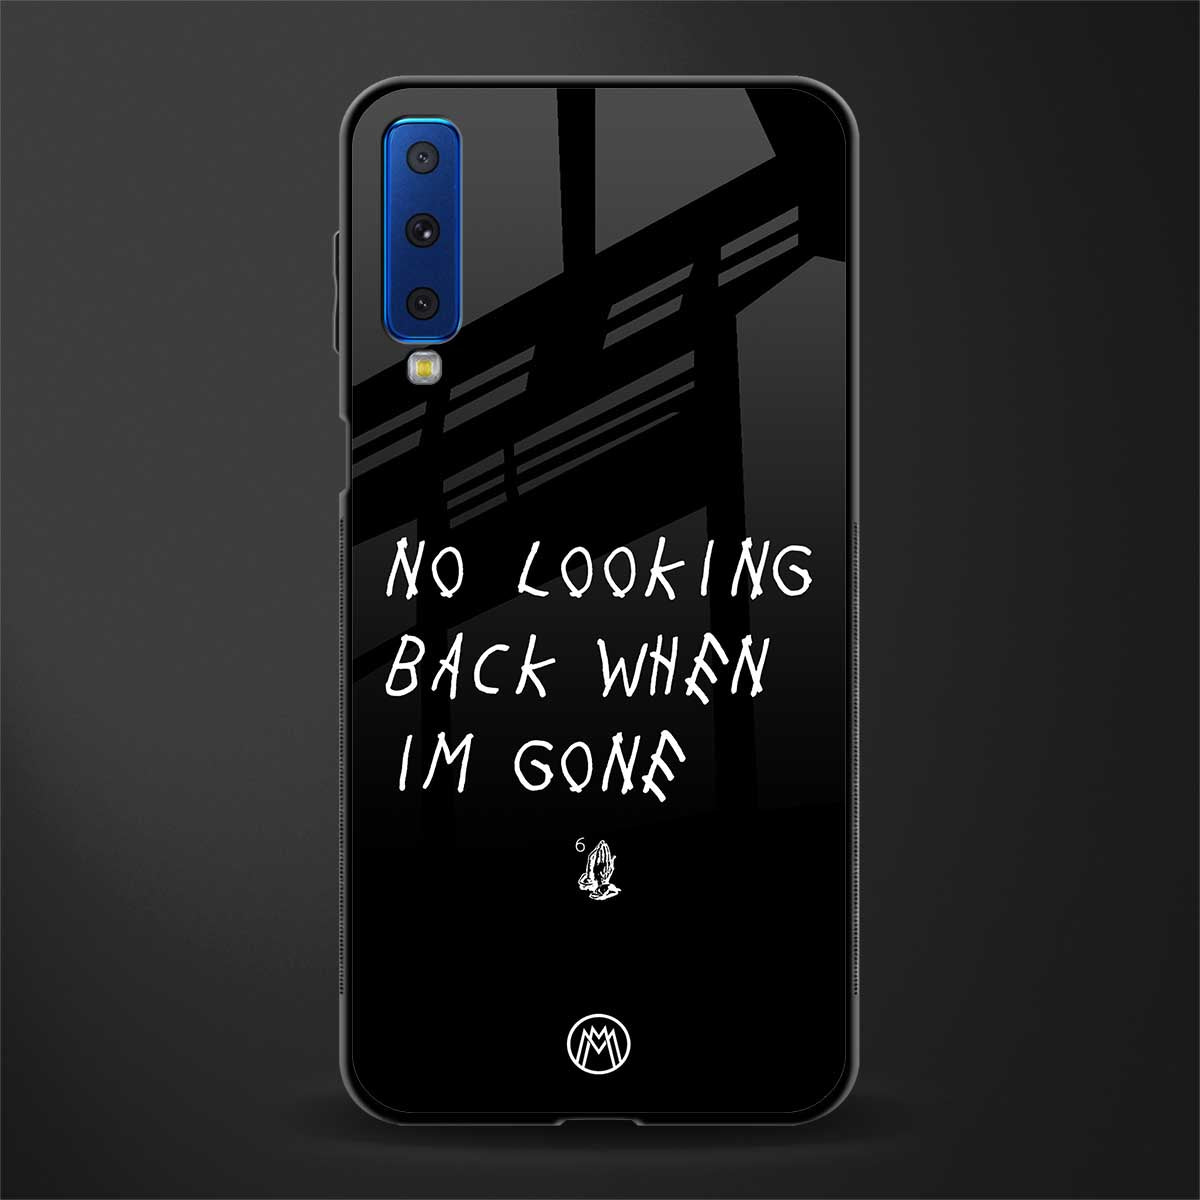 no looking back glass case for samsung galaxy a7 2018 image